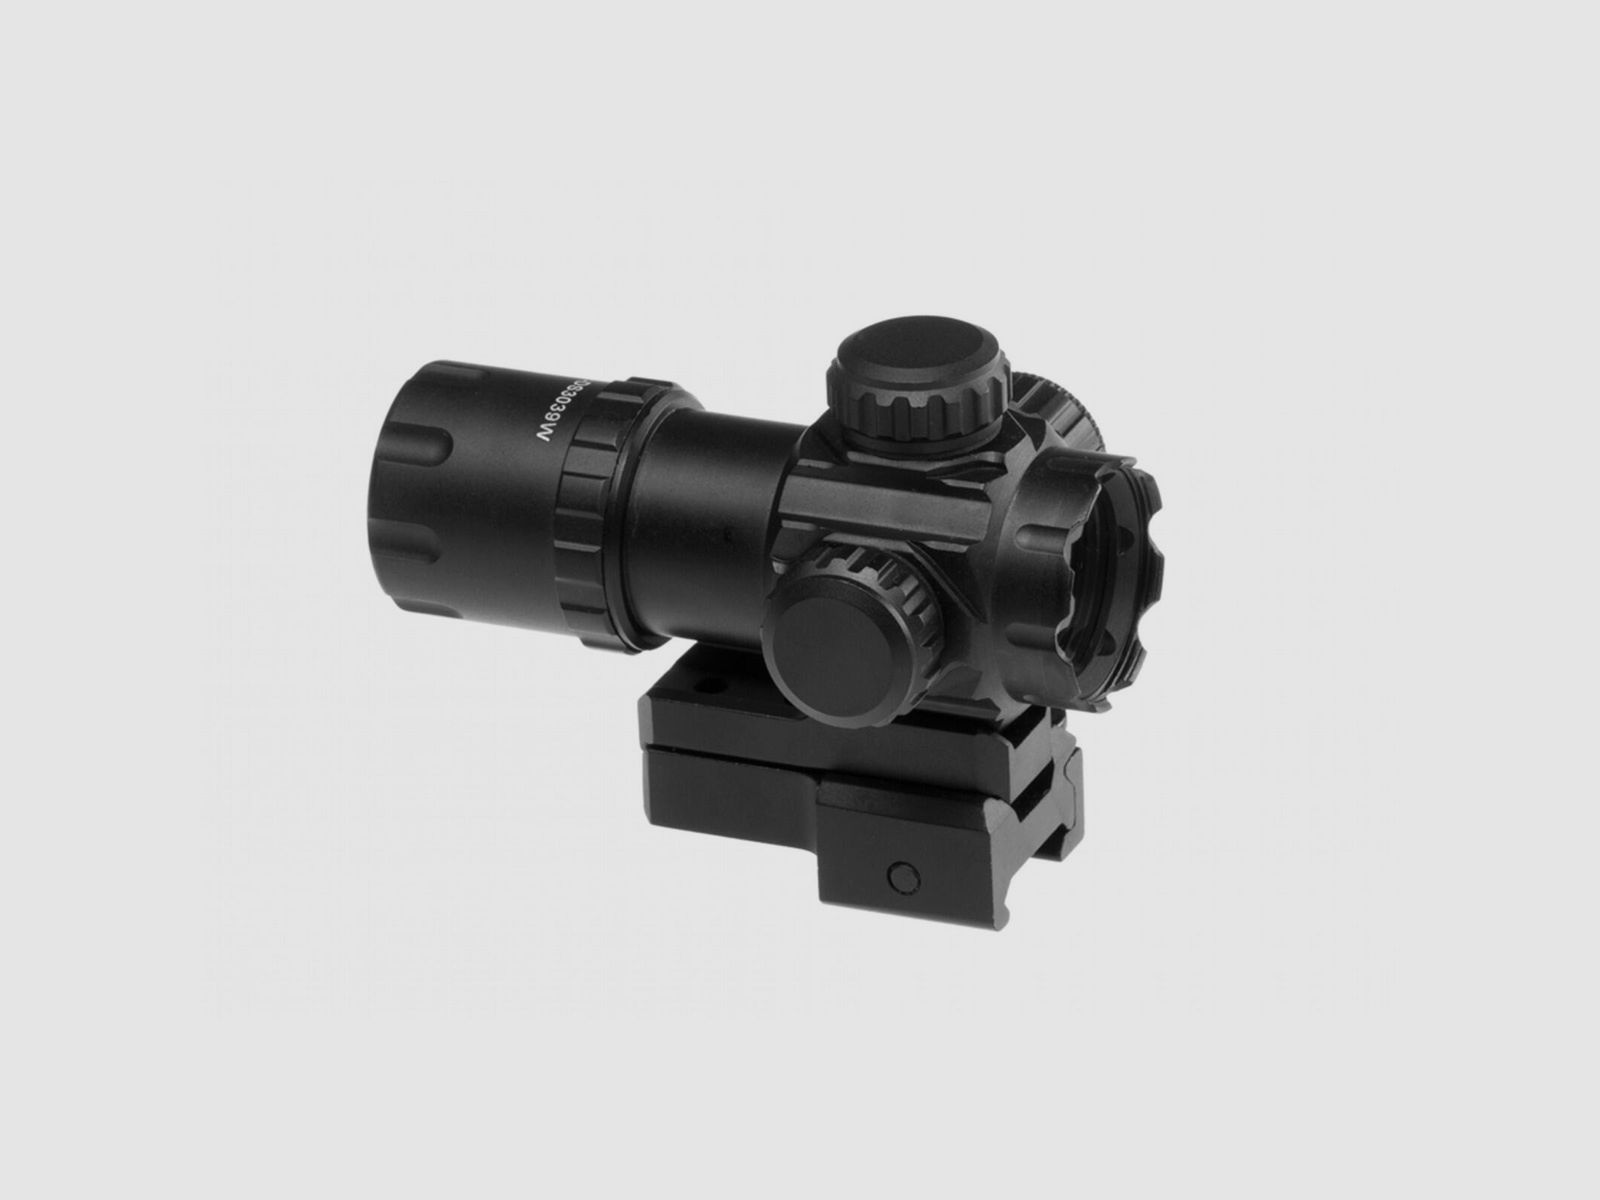 Leapers 3.9 Inch 1x26 Tactical Dot Sight TS-Schwarz